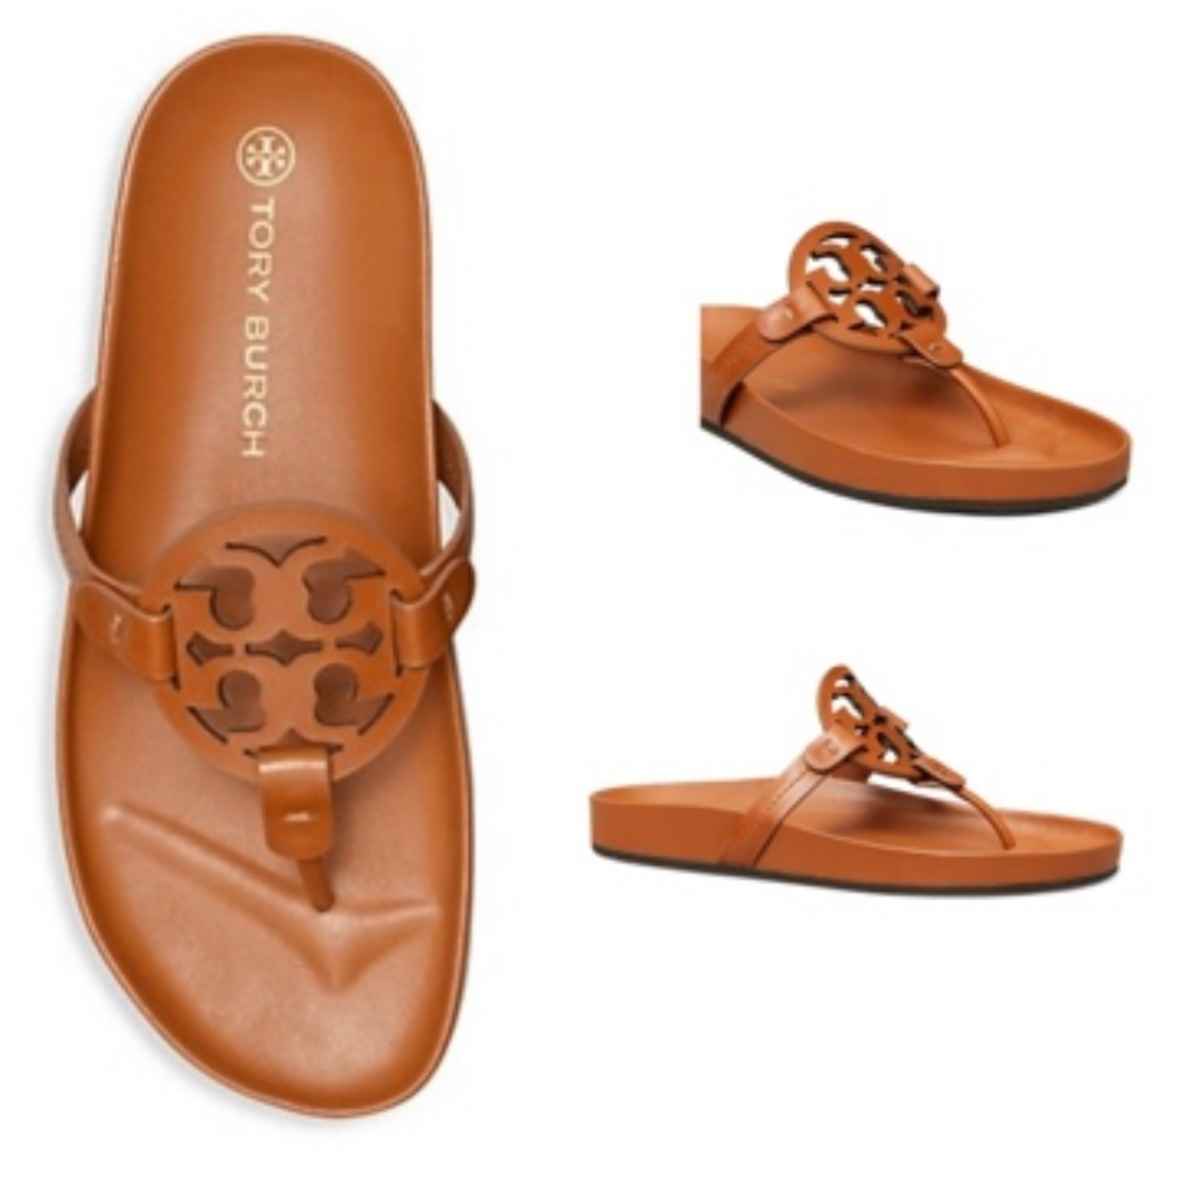 Tory Burch Miller Cloud Sandals for just $98 (Reg. $228) SHIPPED at Saks  Fifth Avenue | Smart Savers